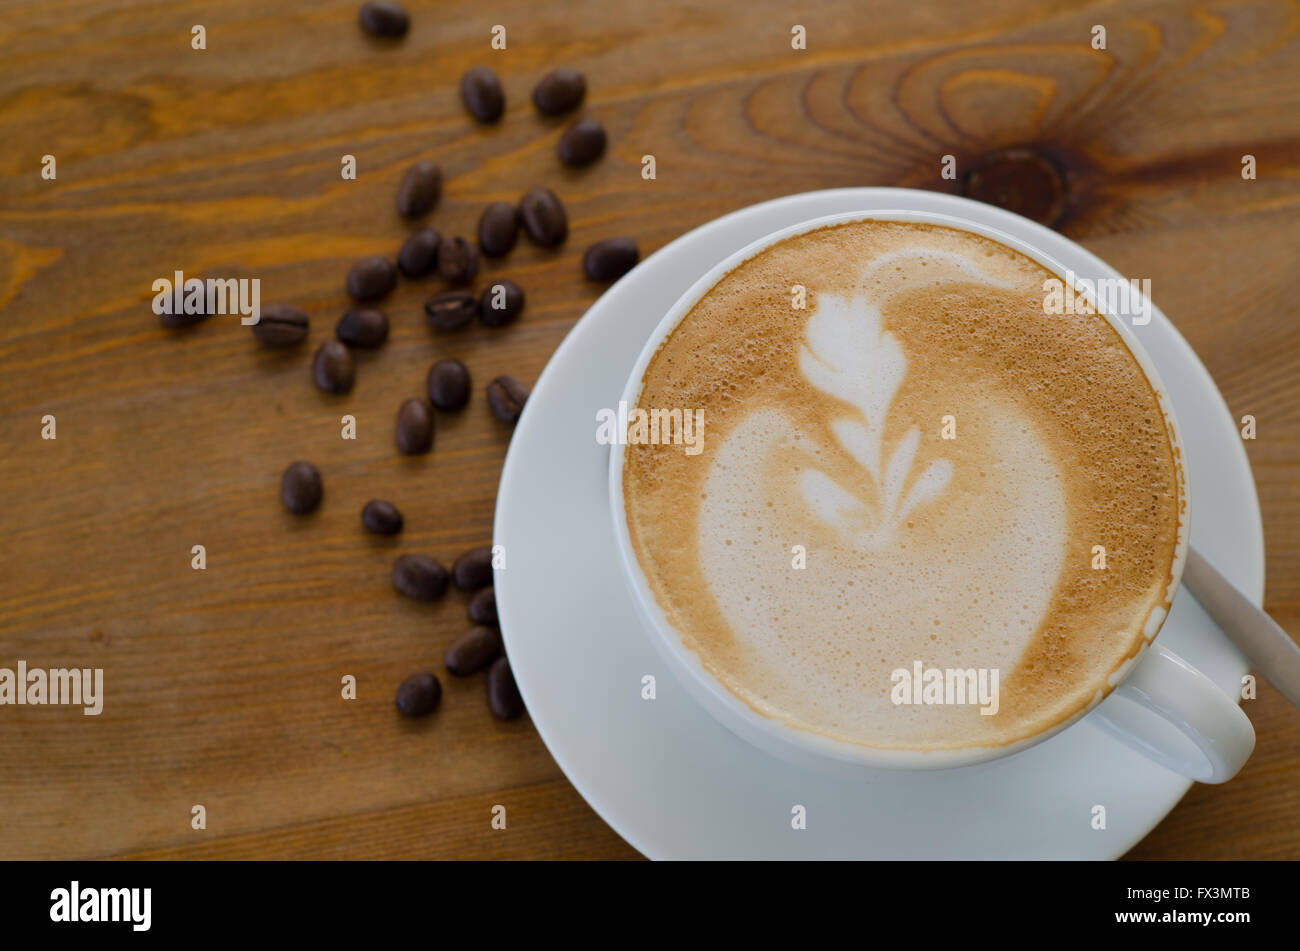 A Cup Of Cappuccino With Coffee Beans And Bread Stock Photo